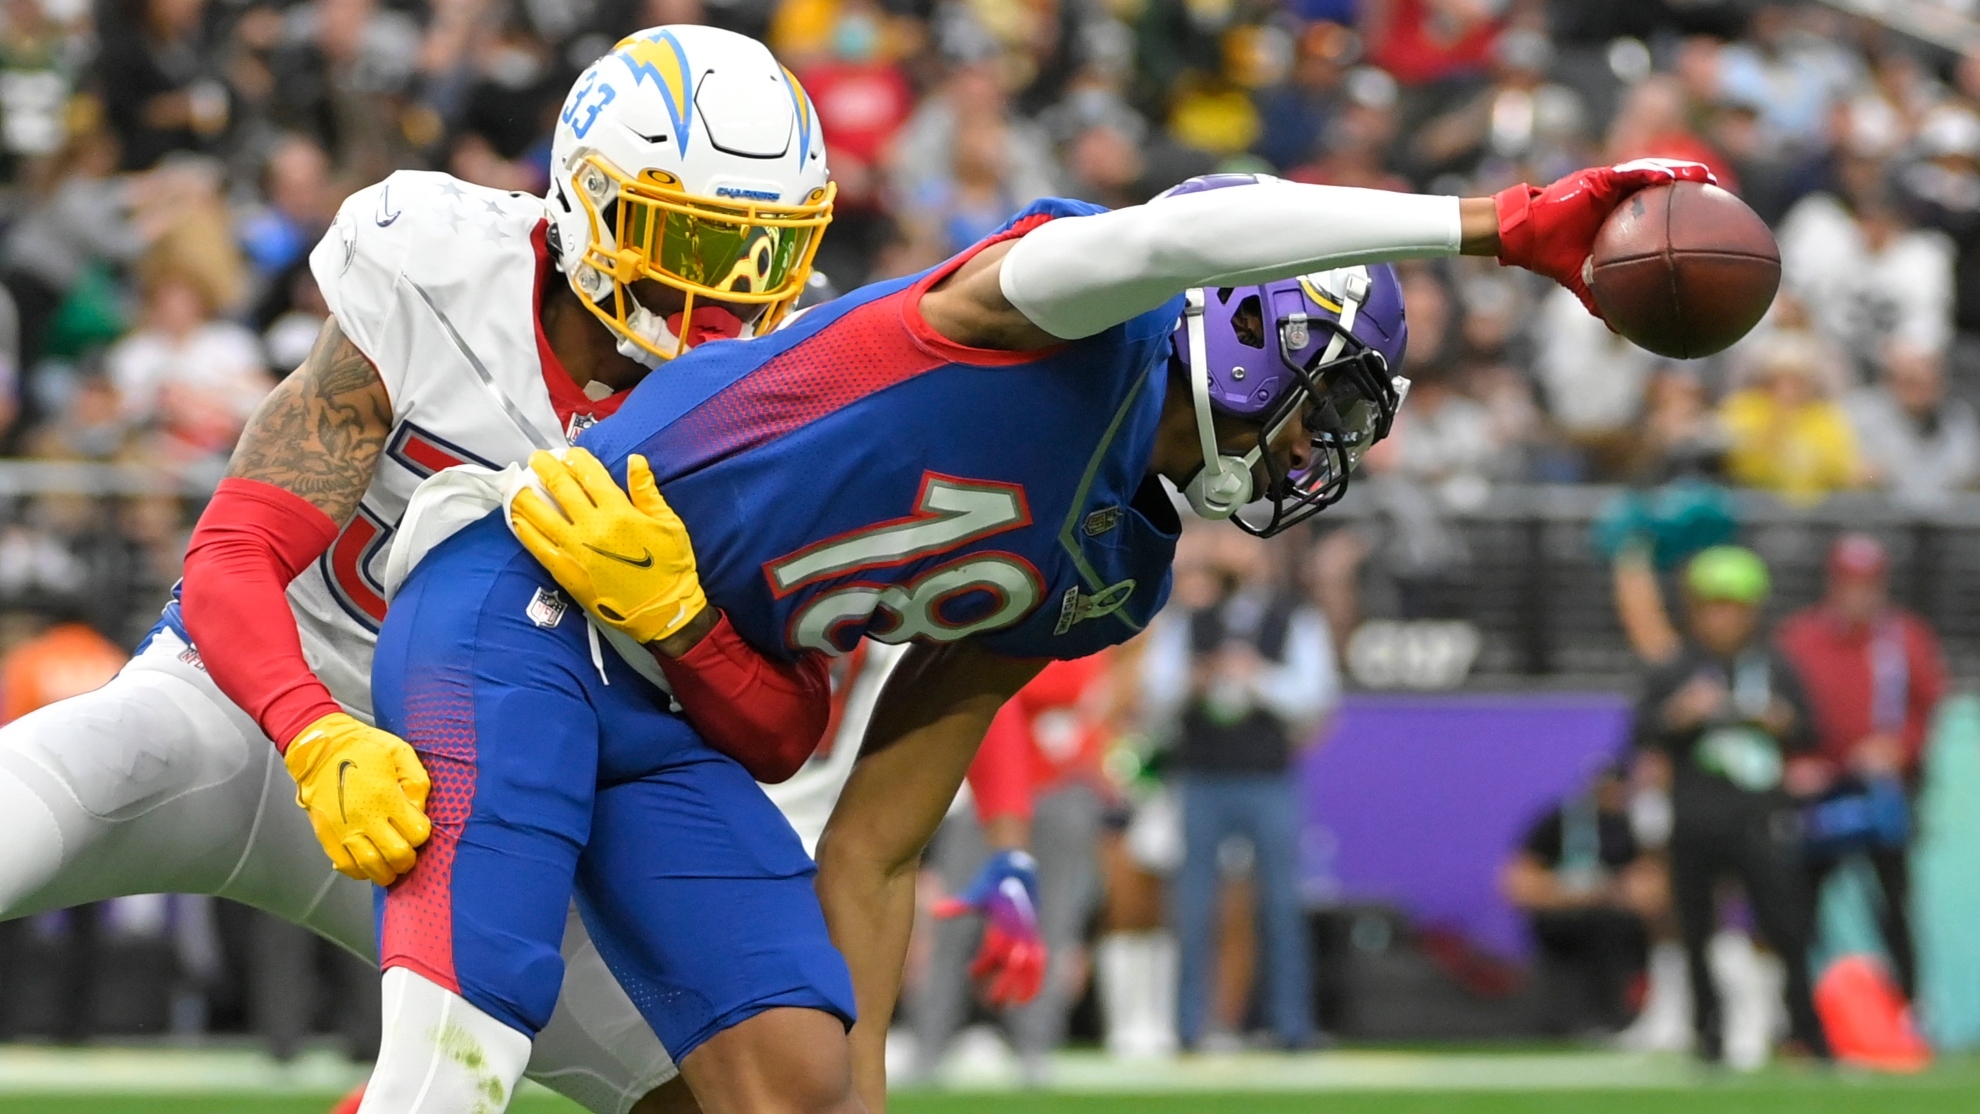 Pro Bowl Game 2022 NFC 35-41 AFC: Score and highlights